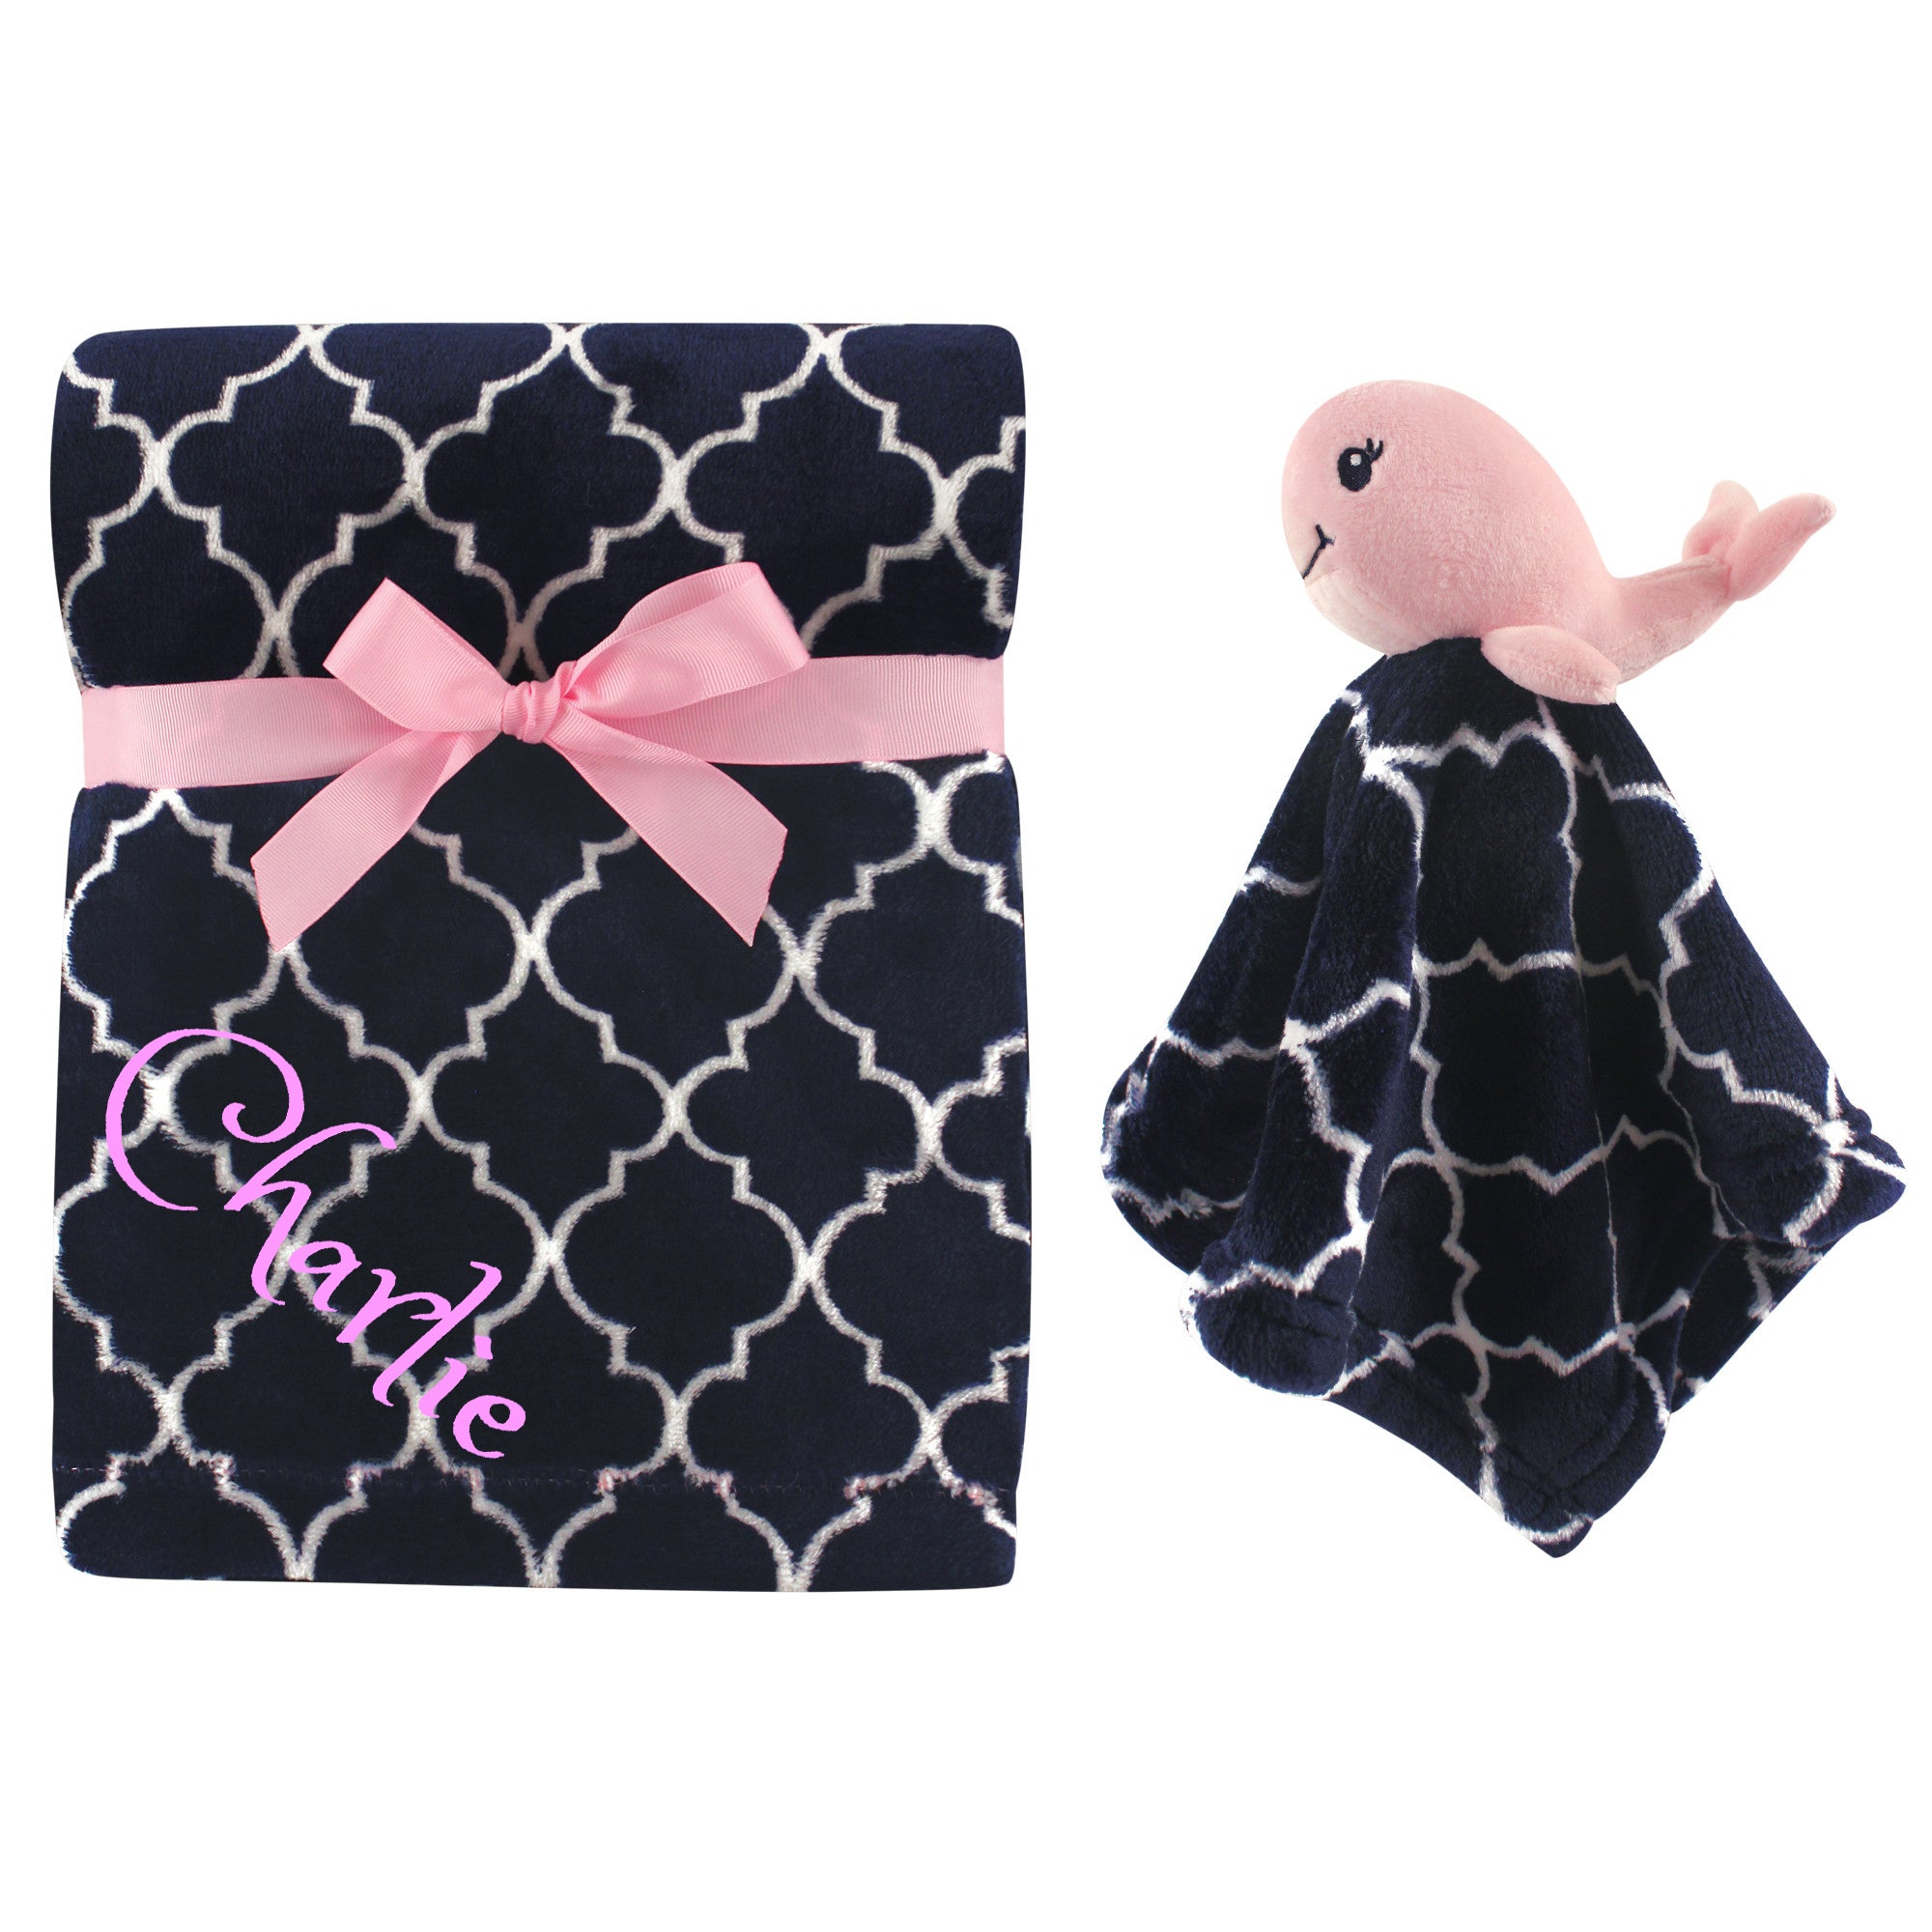 Personalized Animal Blanket & security blanket Set For Baby - Pink WHALE